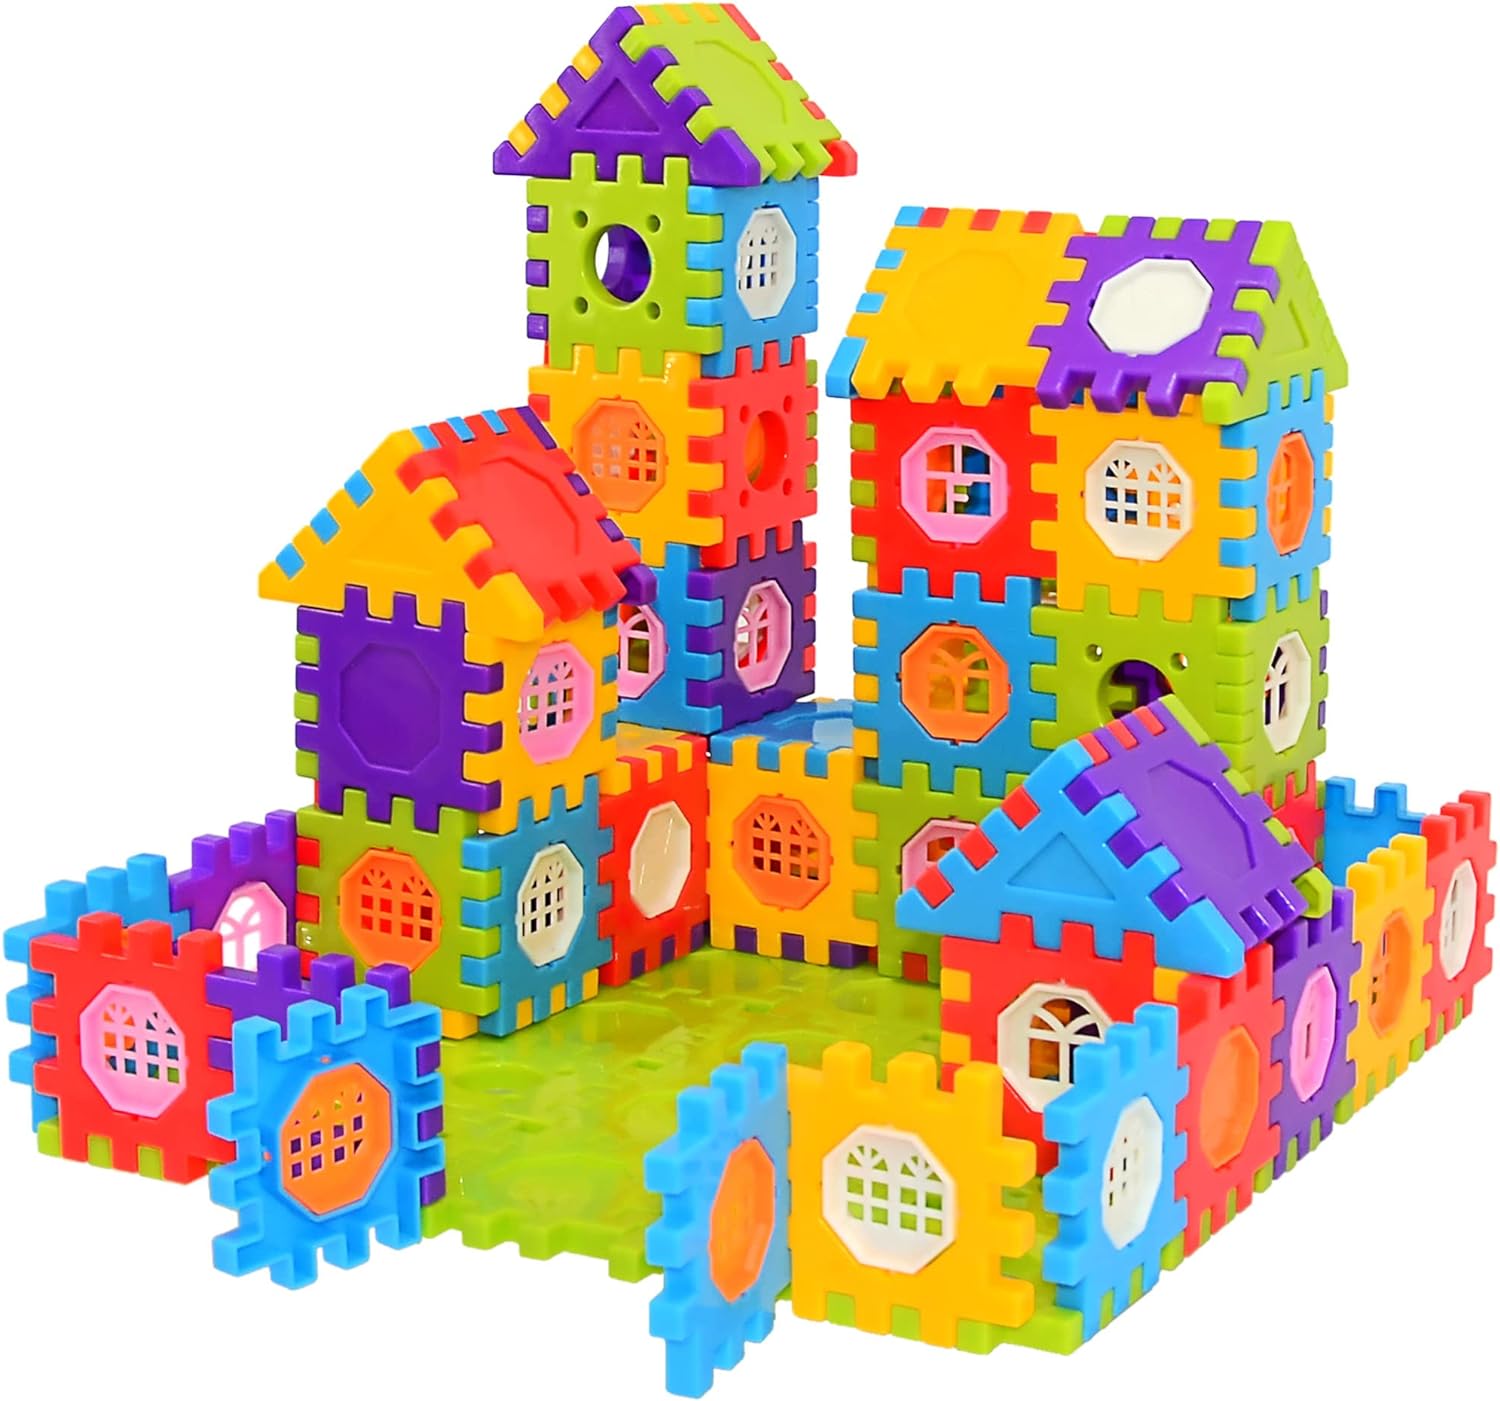 Madzee 109 Pack Foam Brick Building Blocks for Kids, Builders Set for  Construction and Stacking